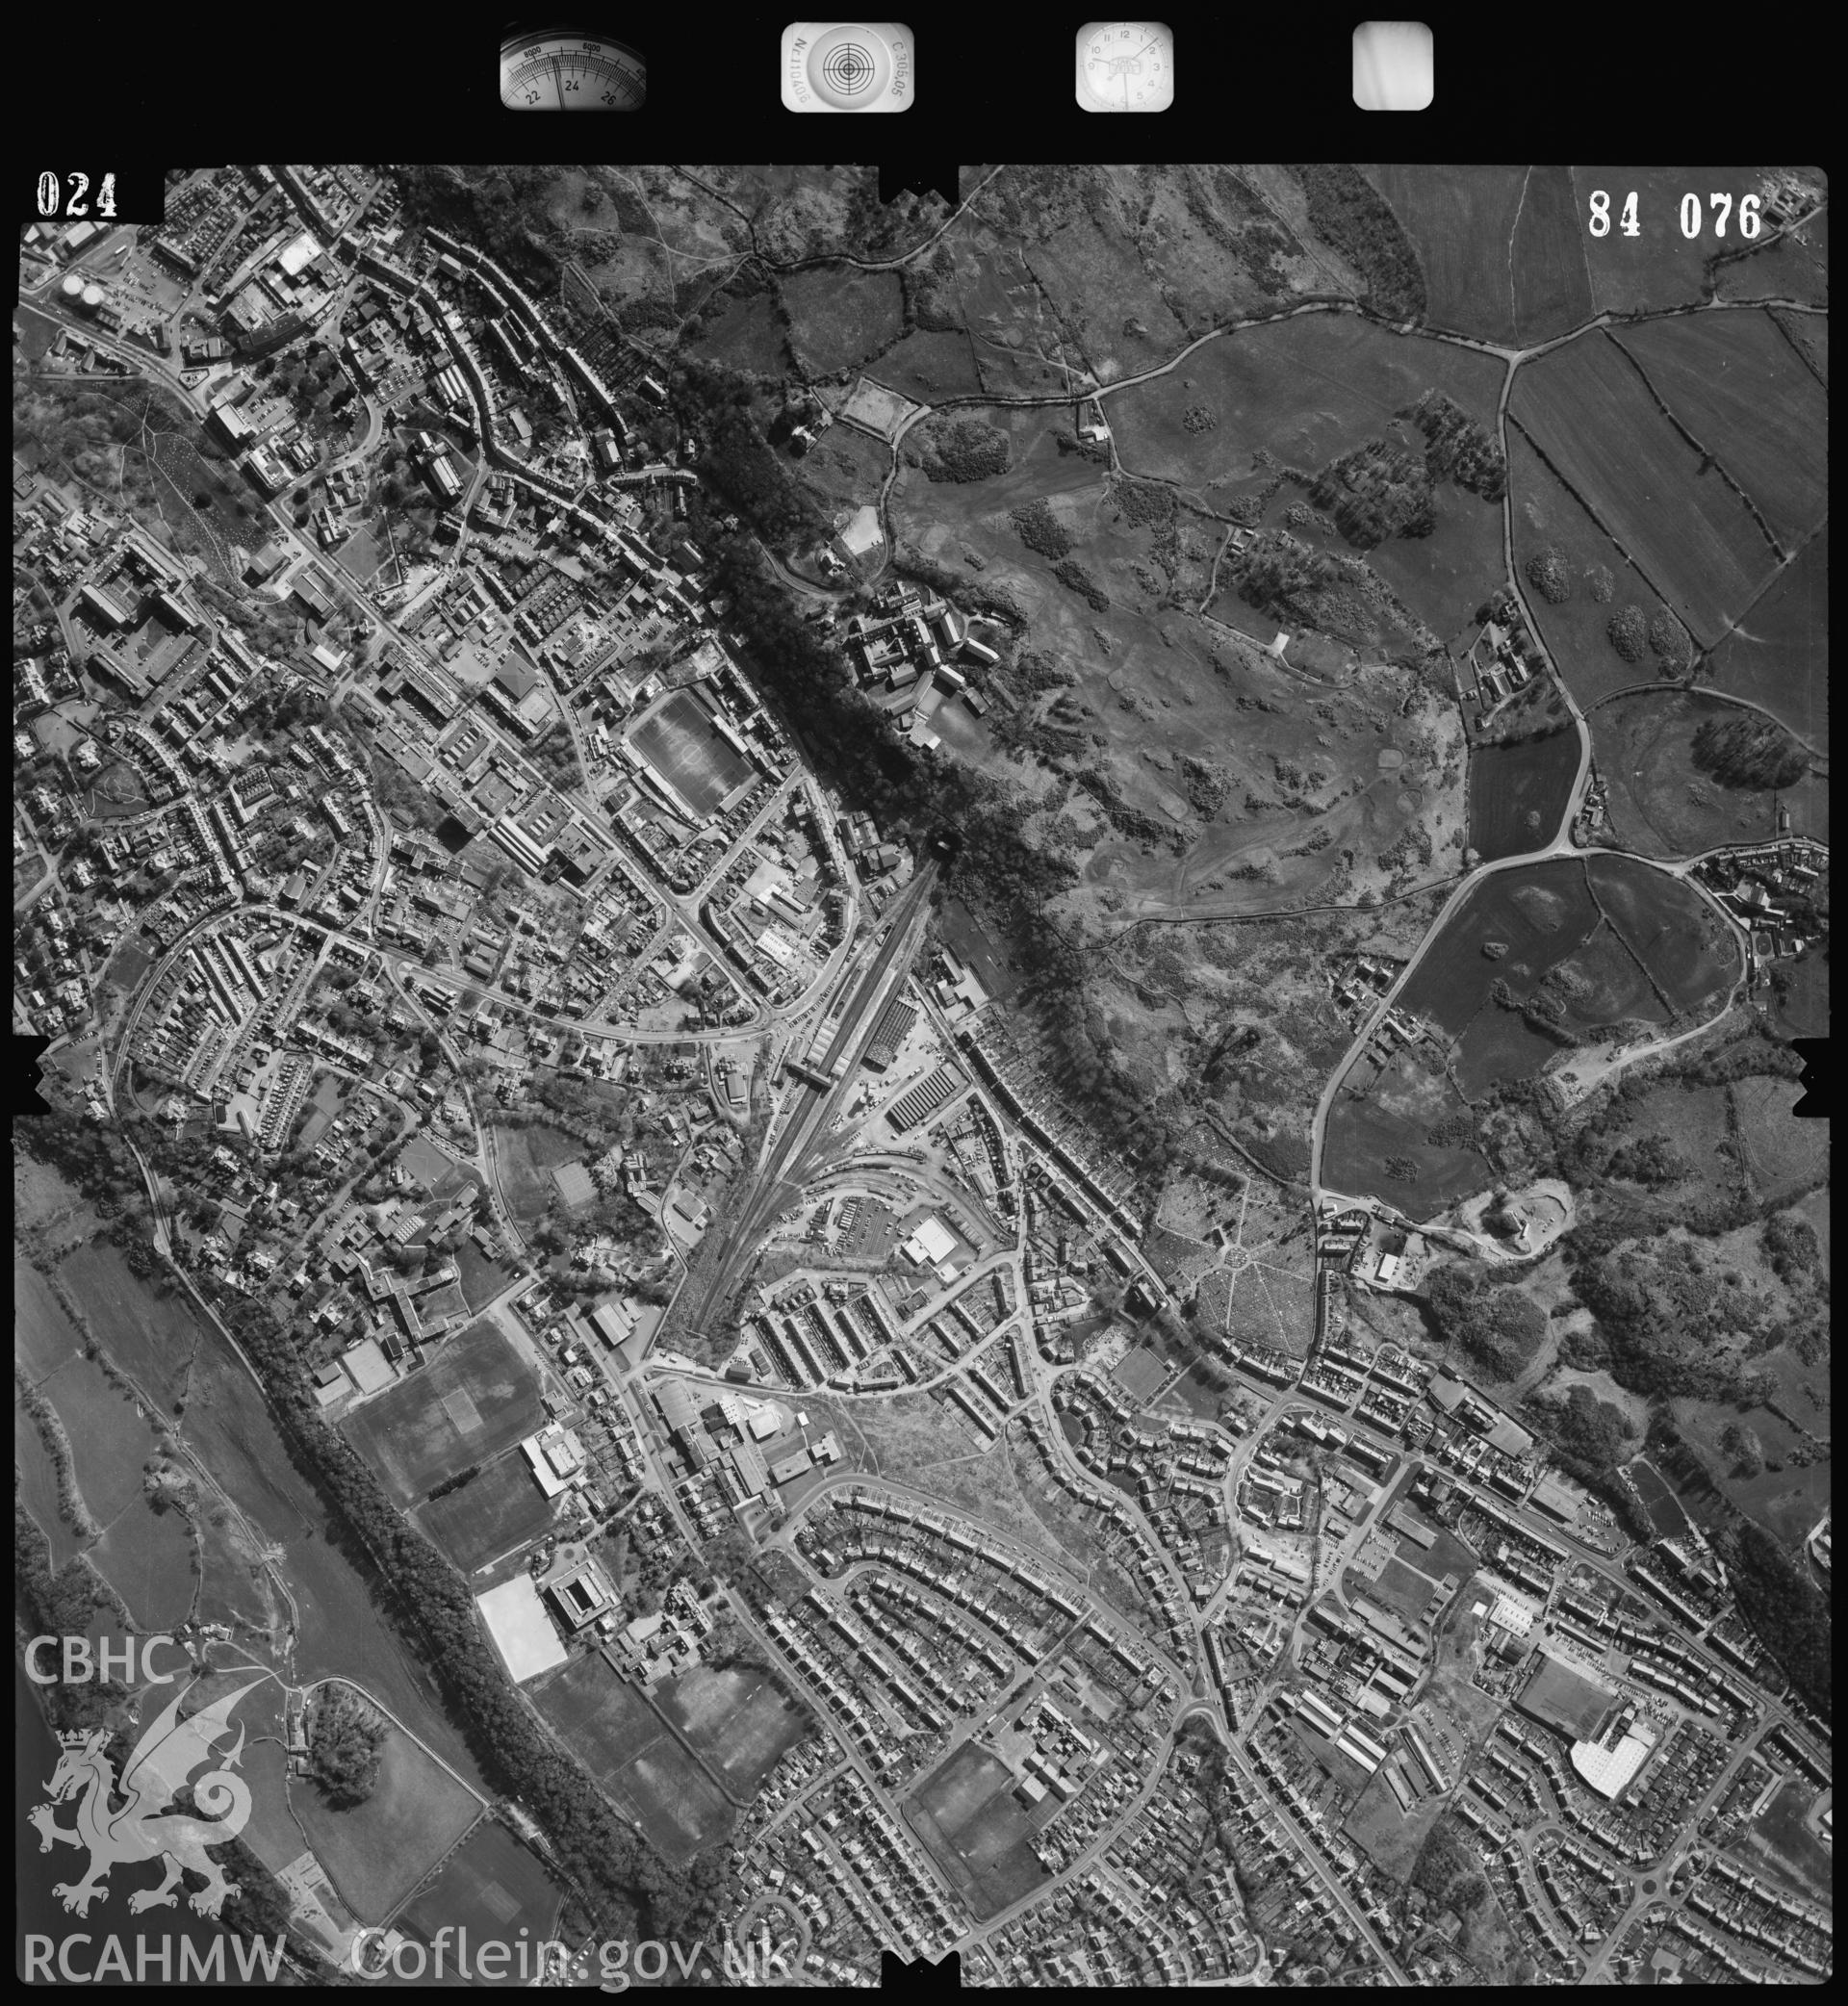 Digitized copy of an aerial photograph showing Upper Bangor area, taken by Ordnance Survey, 1984.